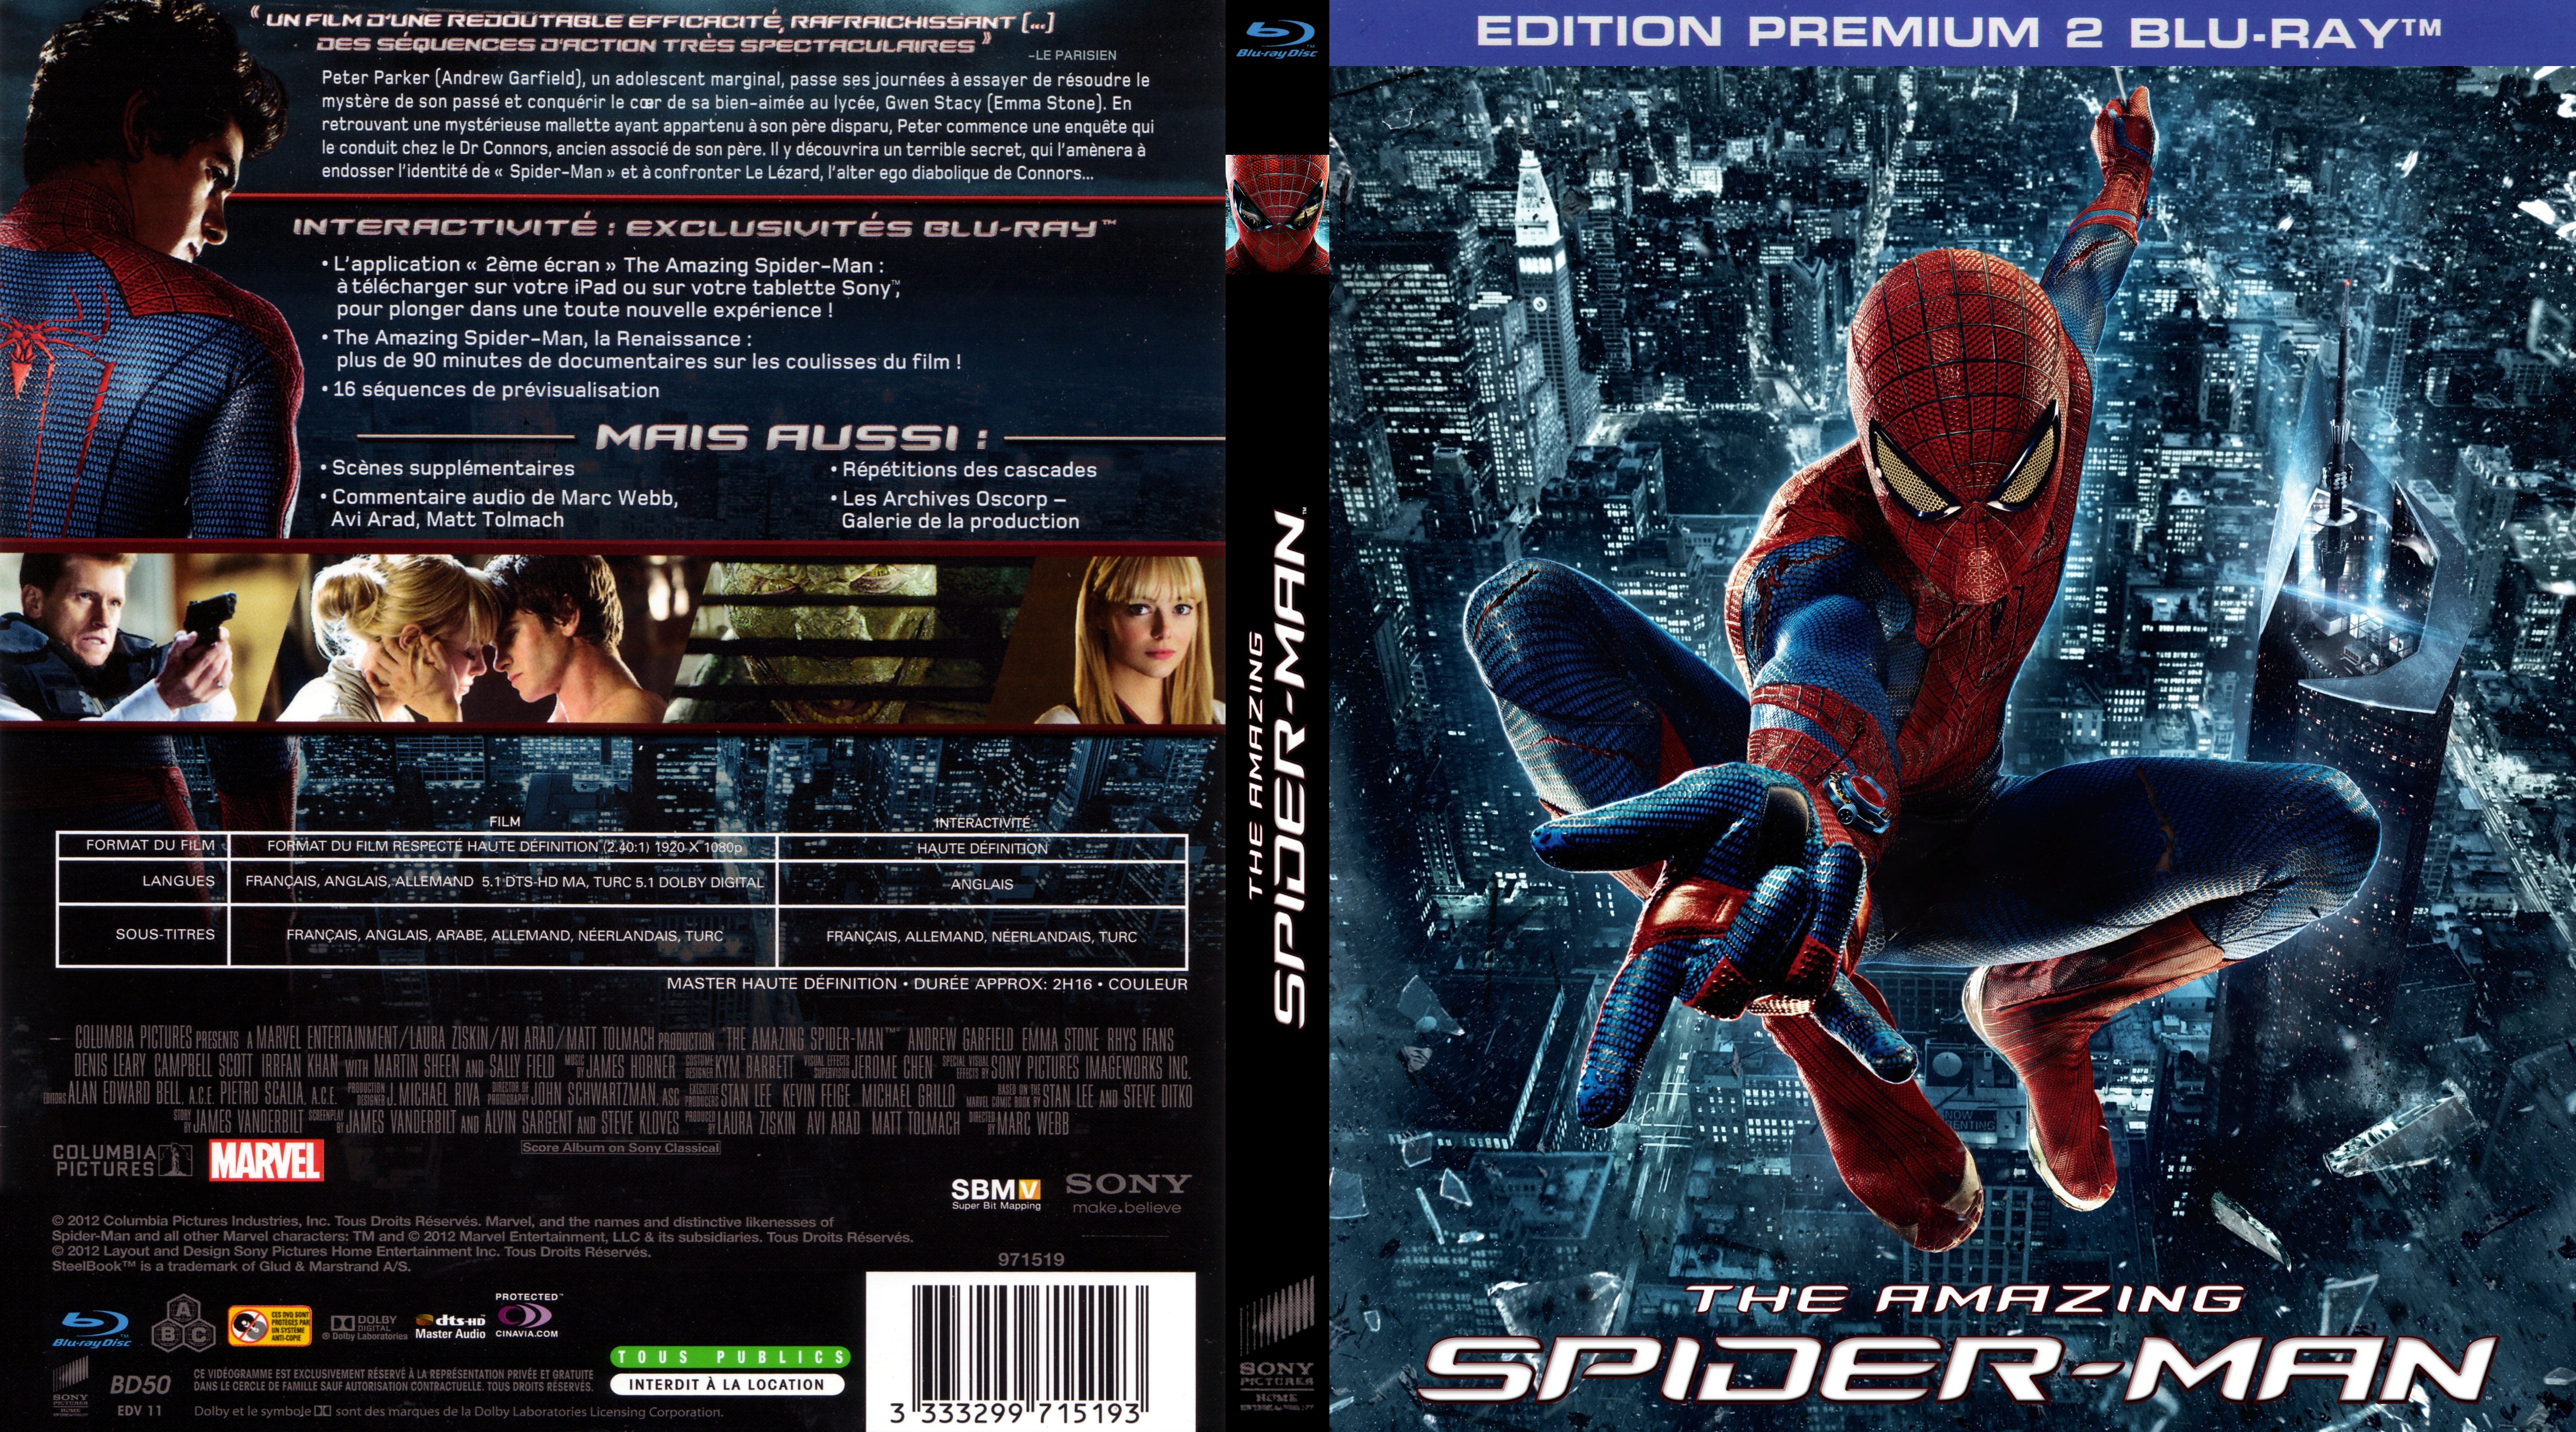 Jaquette DVD The Amazing Spider-Man (BLU-RAY) v2